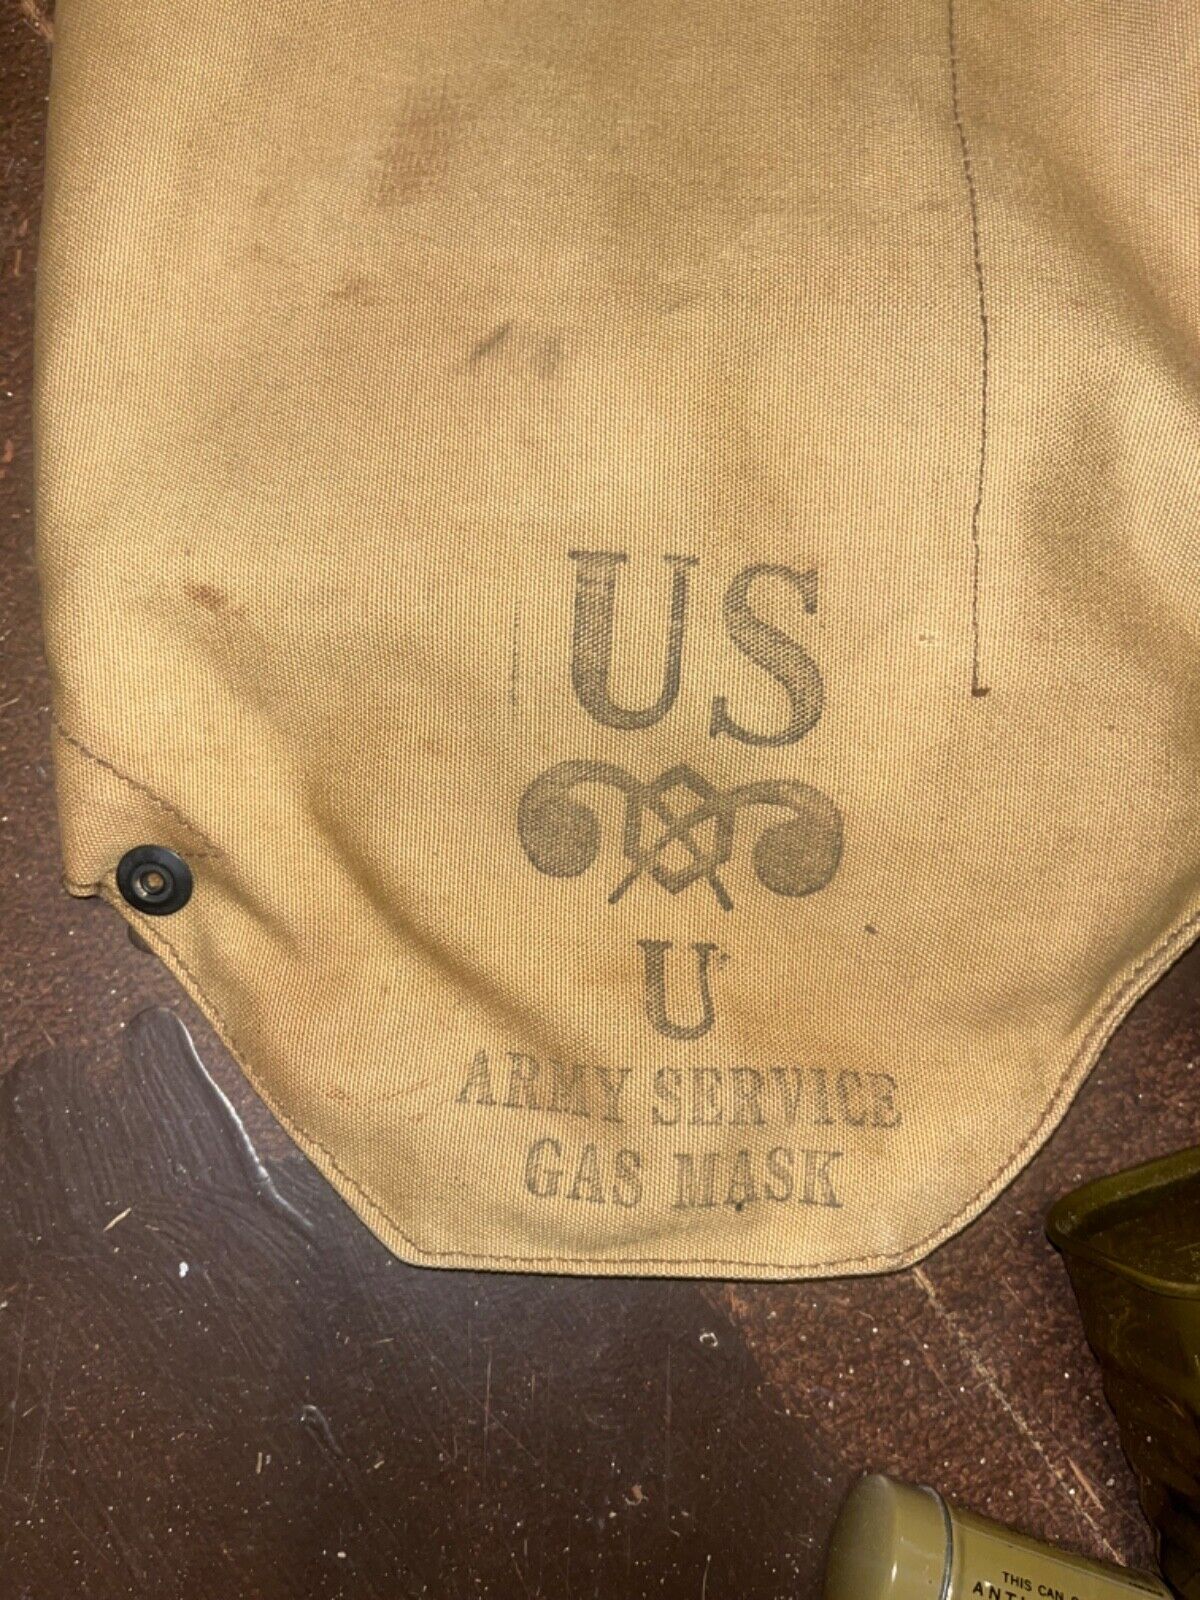 RARE Pre- WWII US Army Service Gas Mask By Firestone made June 1941